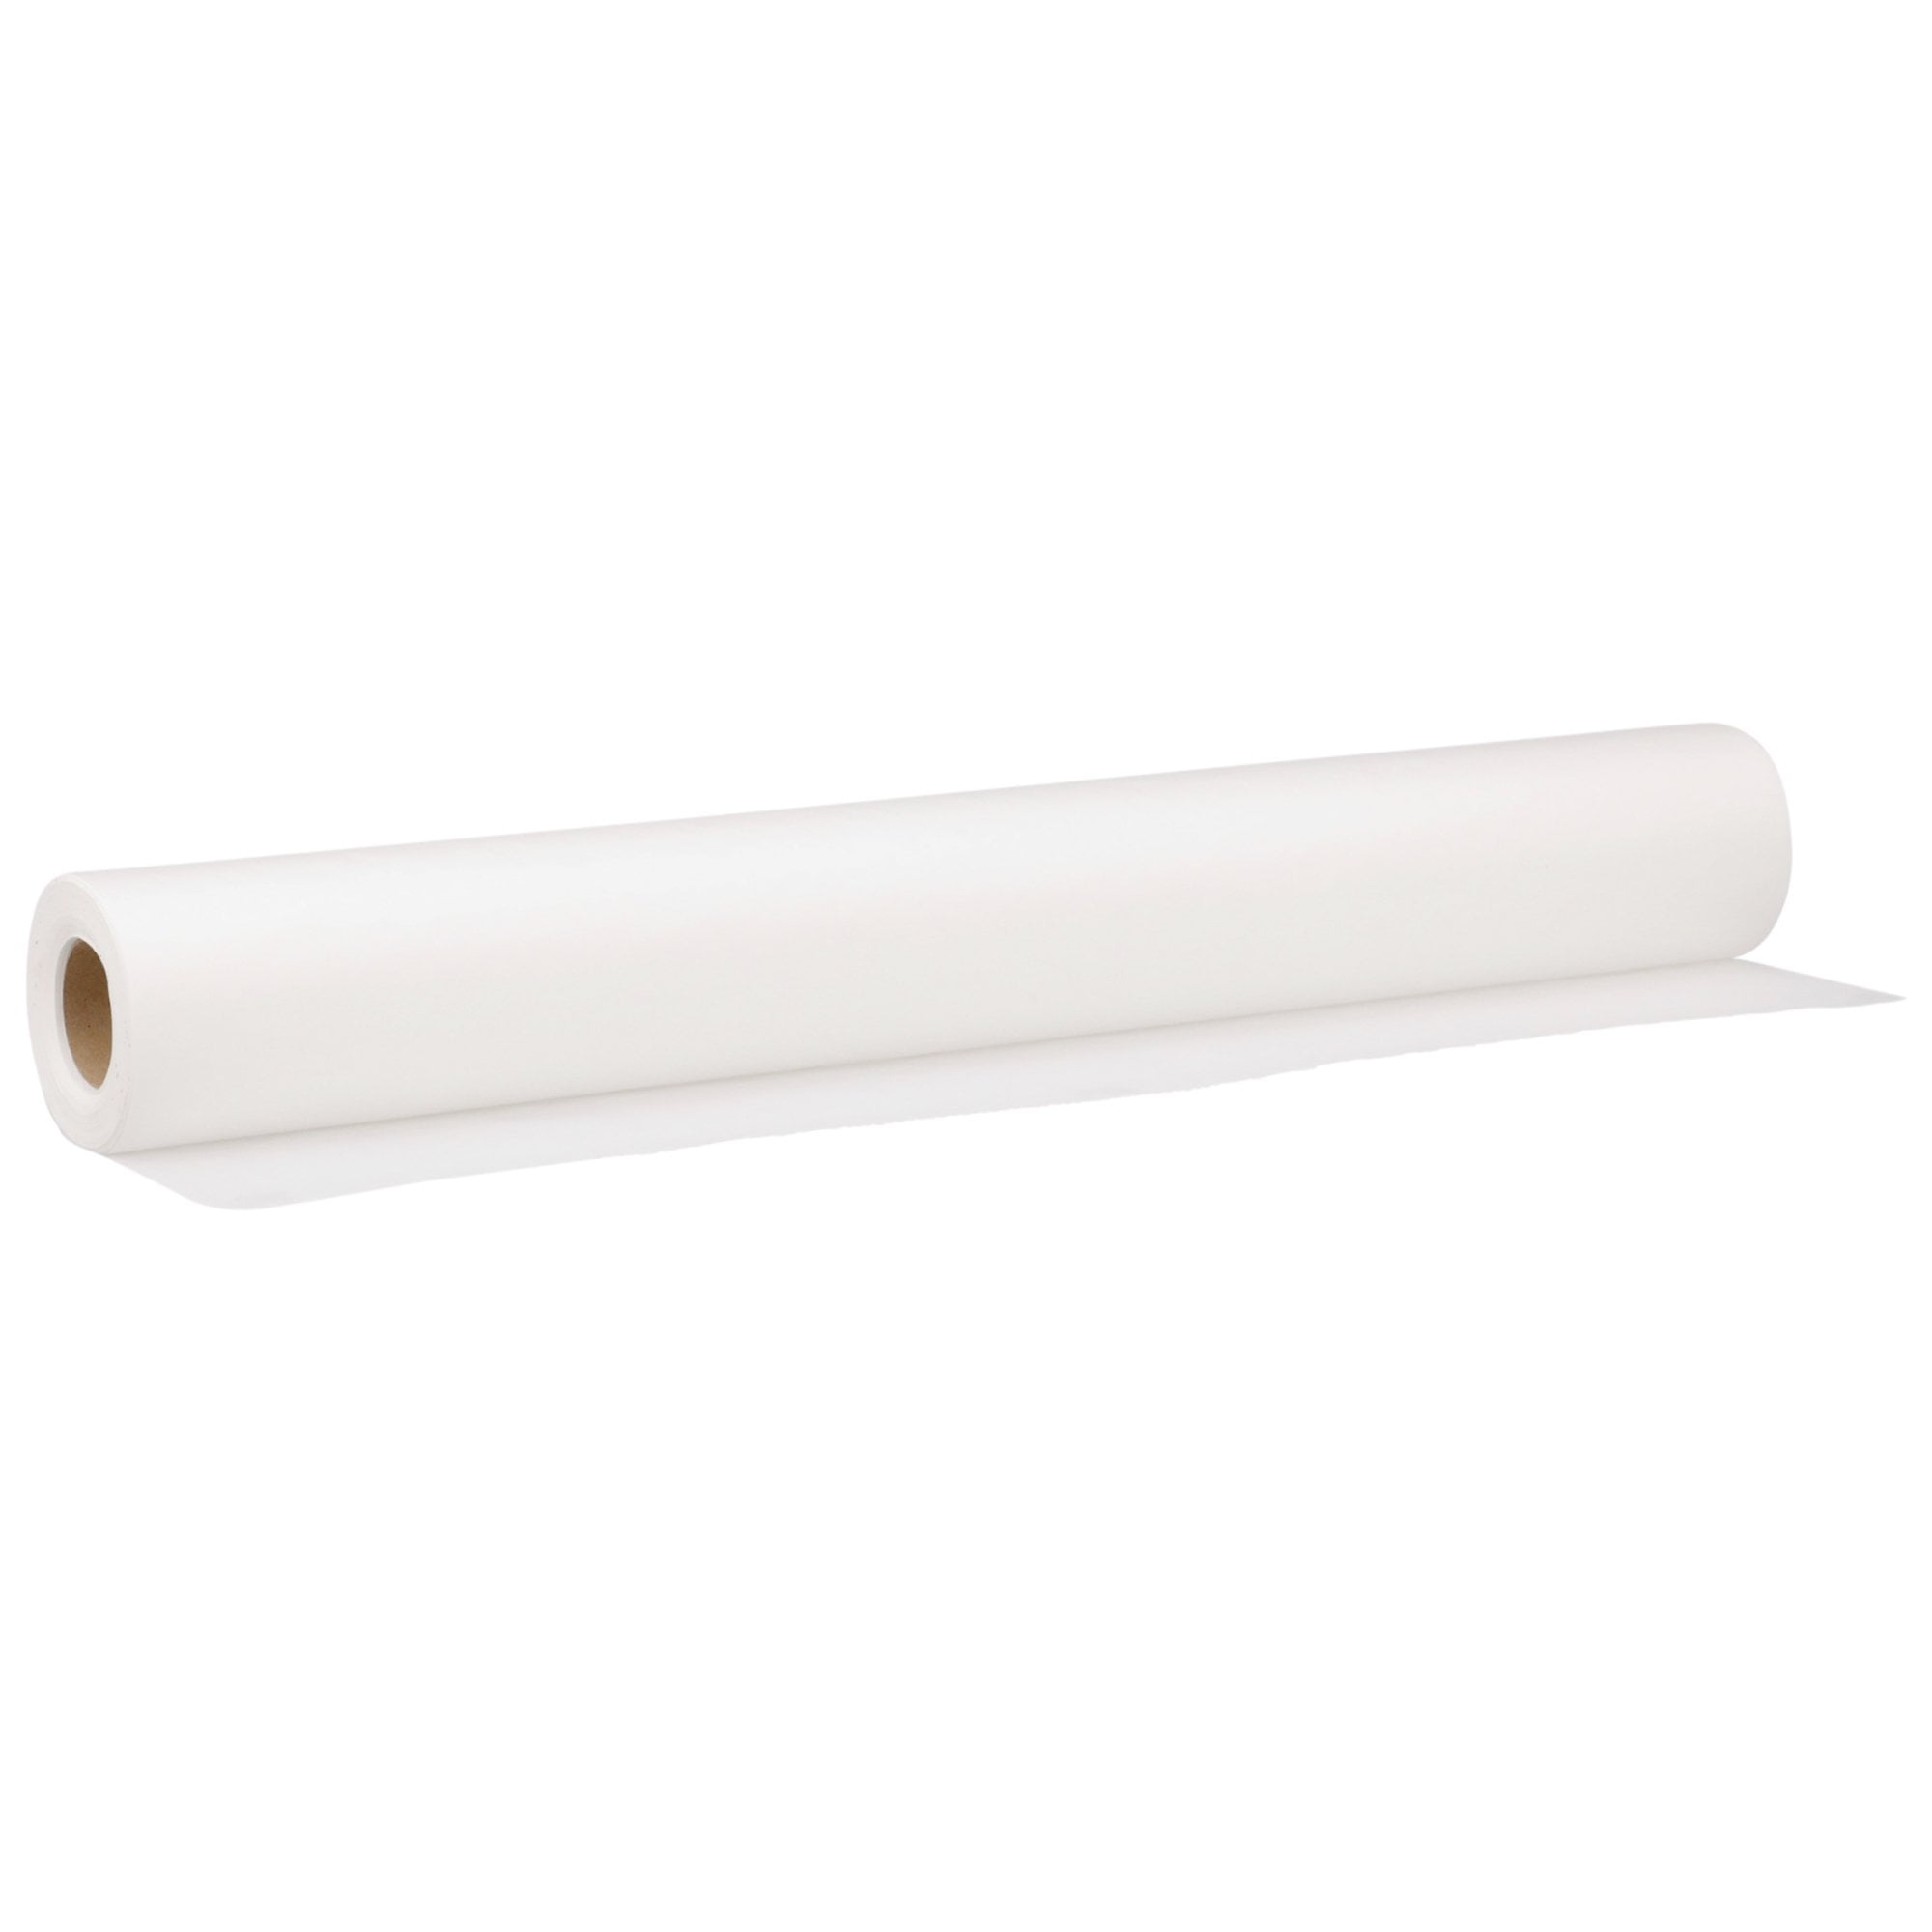 Smooth Table Wax-Paper Roll, 27 W X 225'L